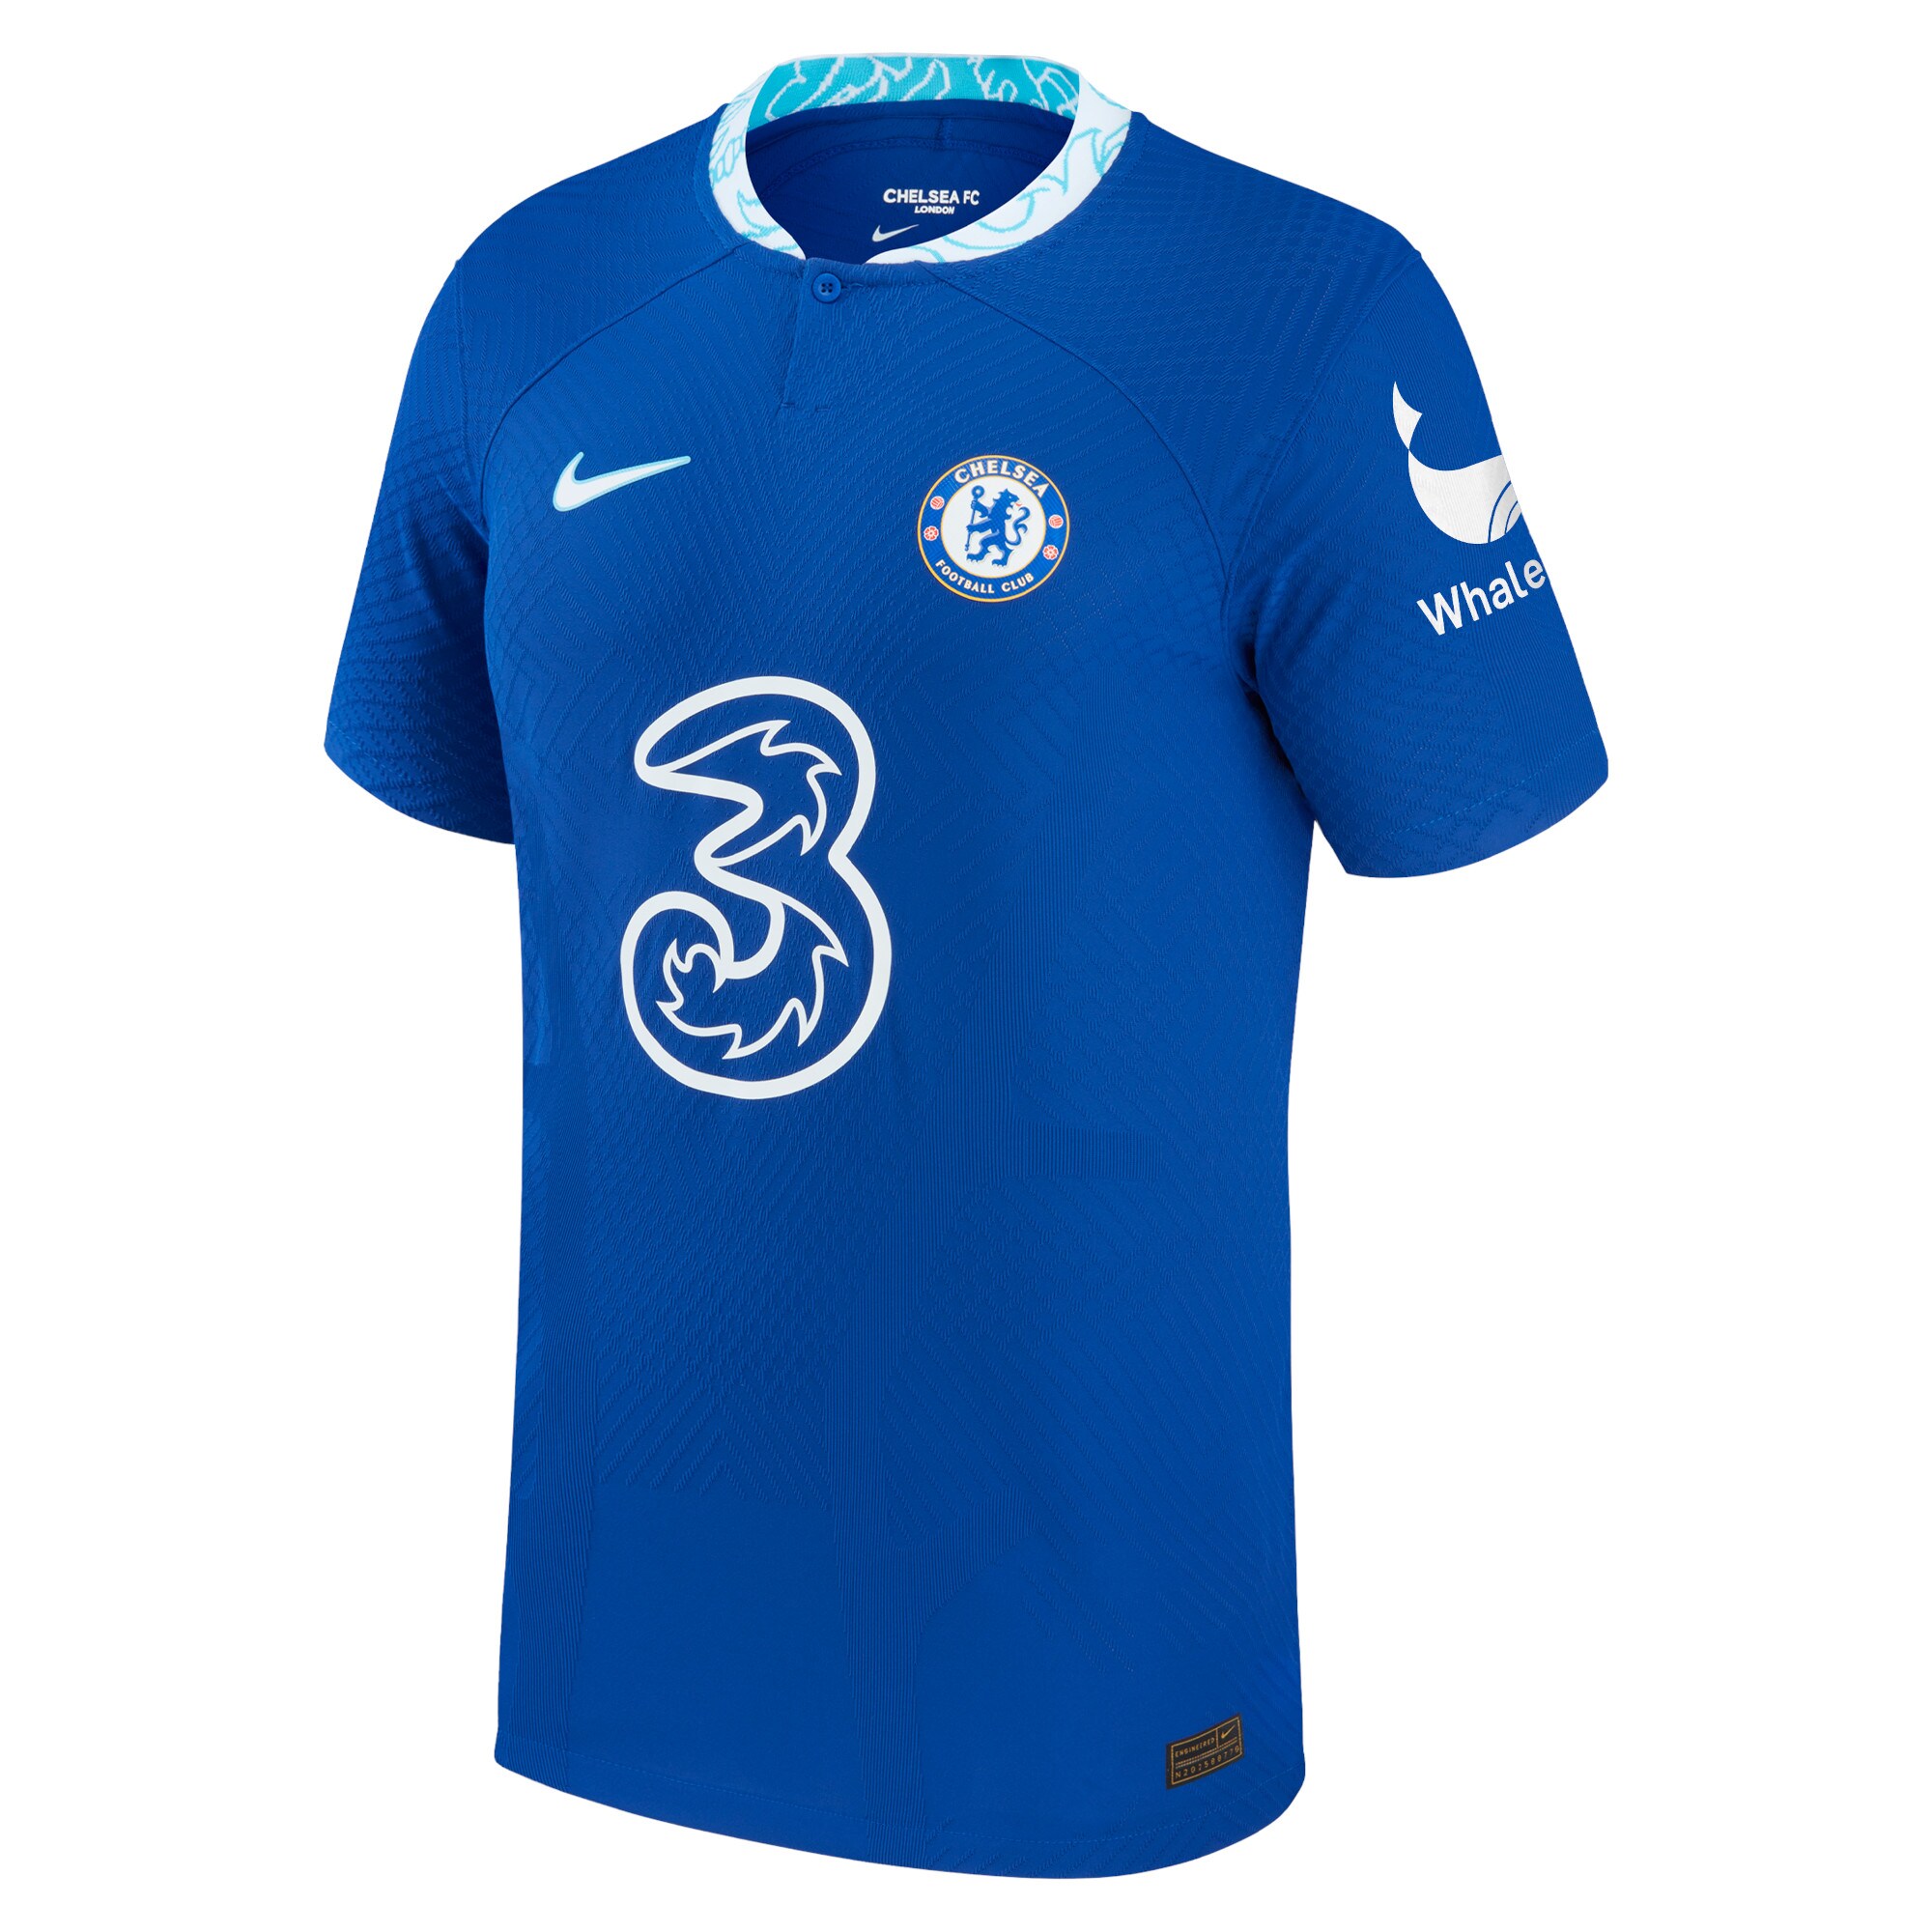 Chelsea Home Vapor Match Shirt 2022-23 with Mudryk 15 printing